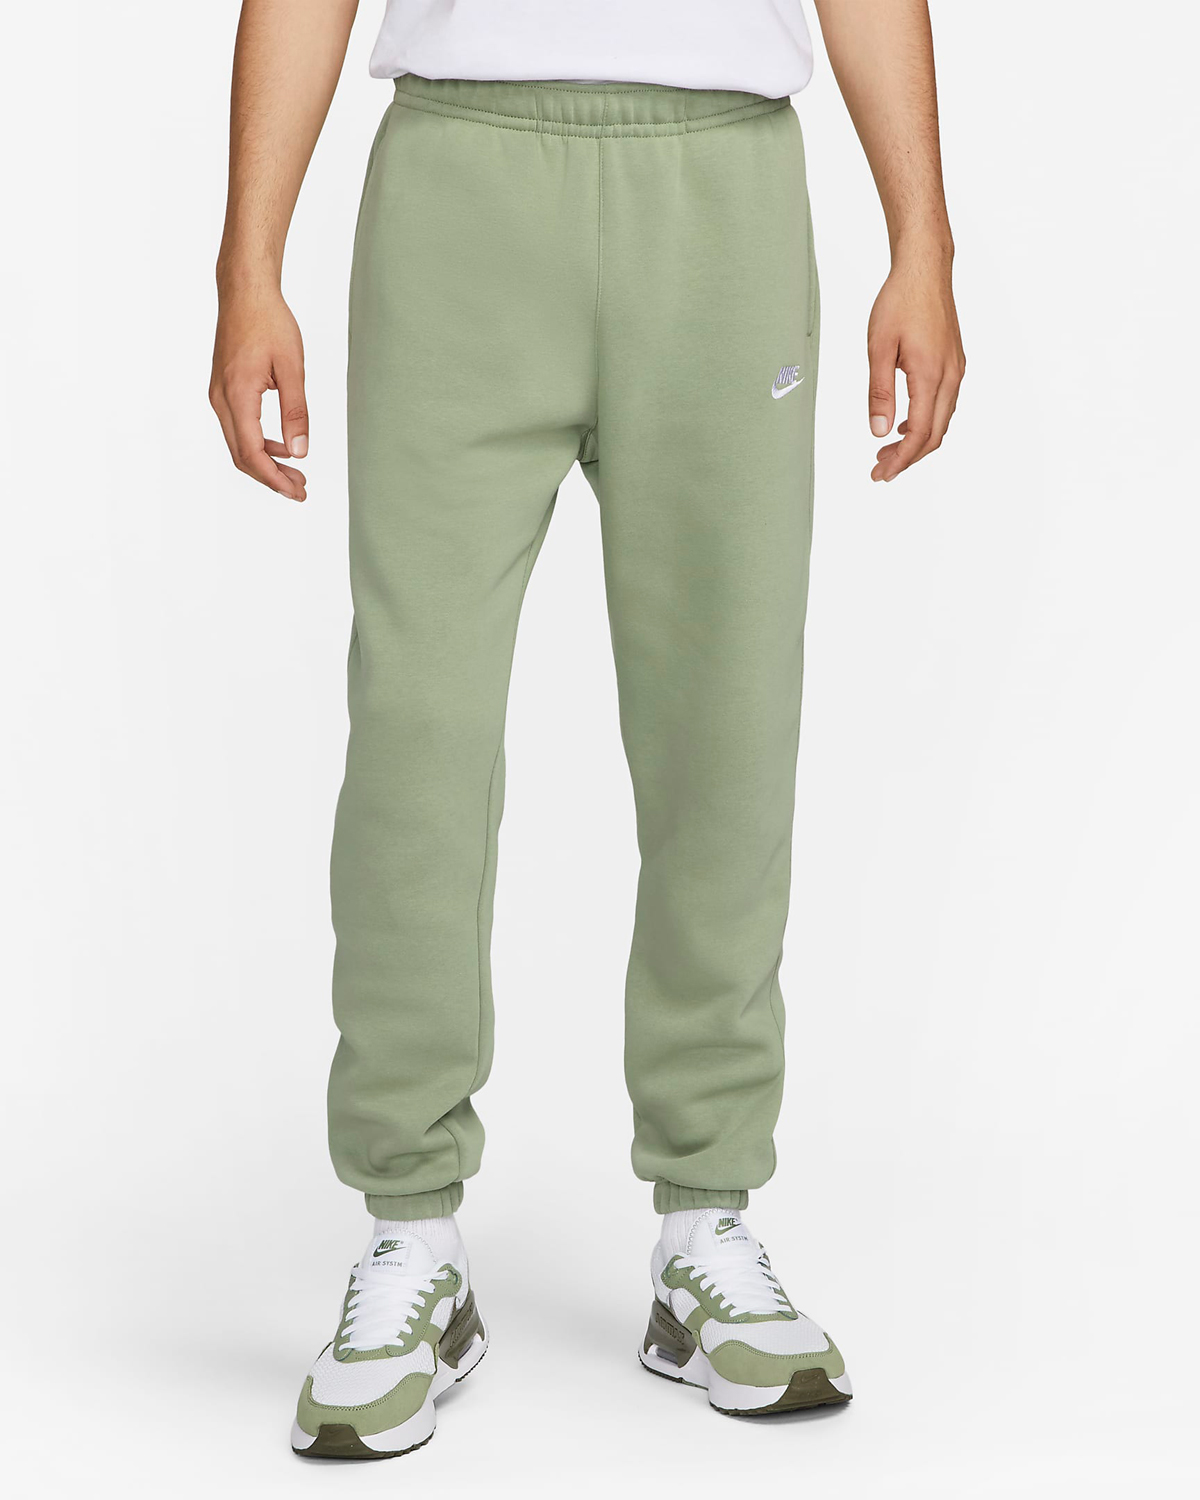 Nike Oil Green Clothing Sneaker Outfits